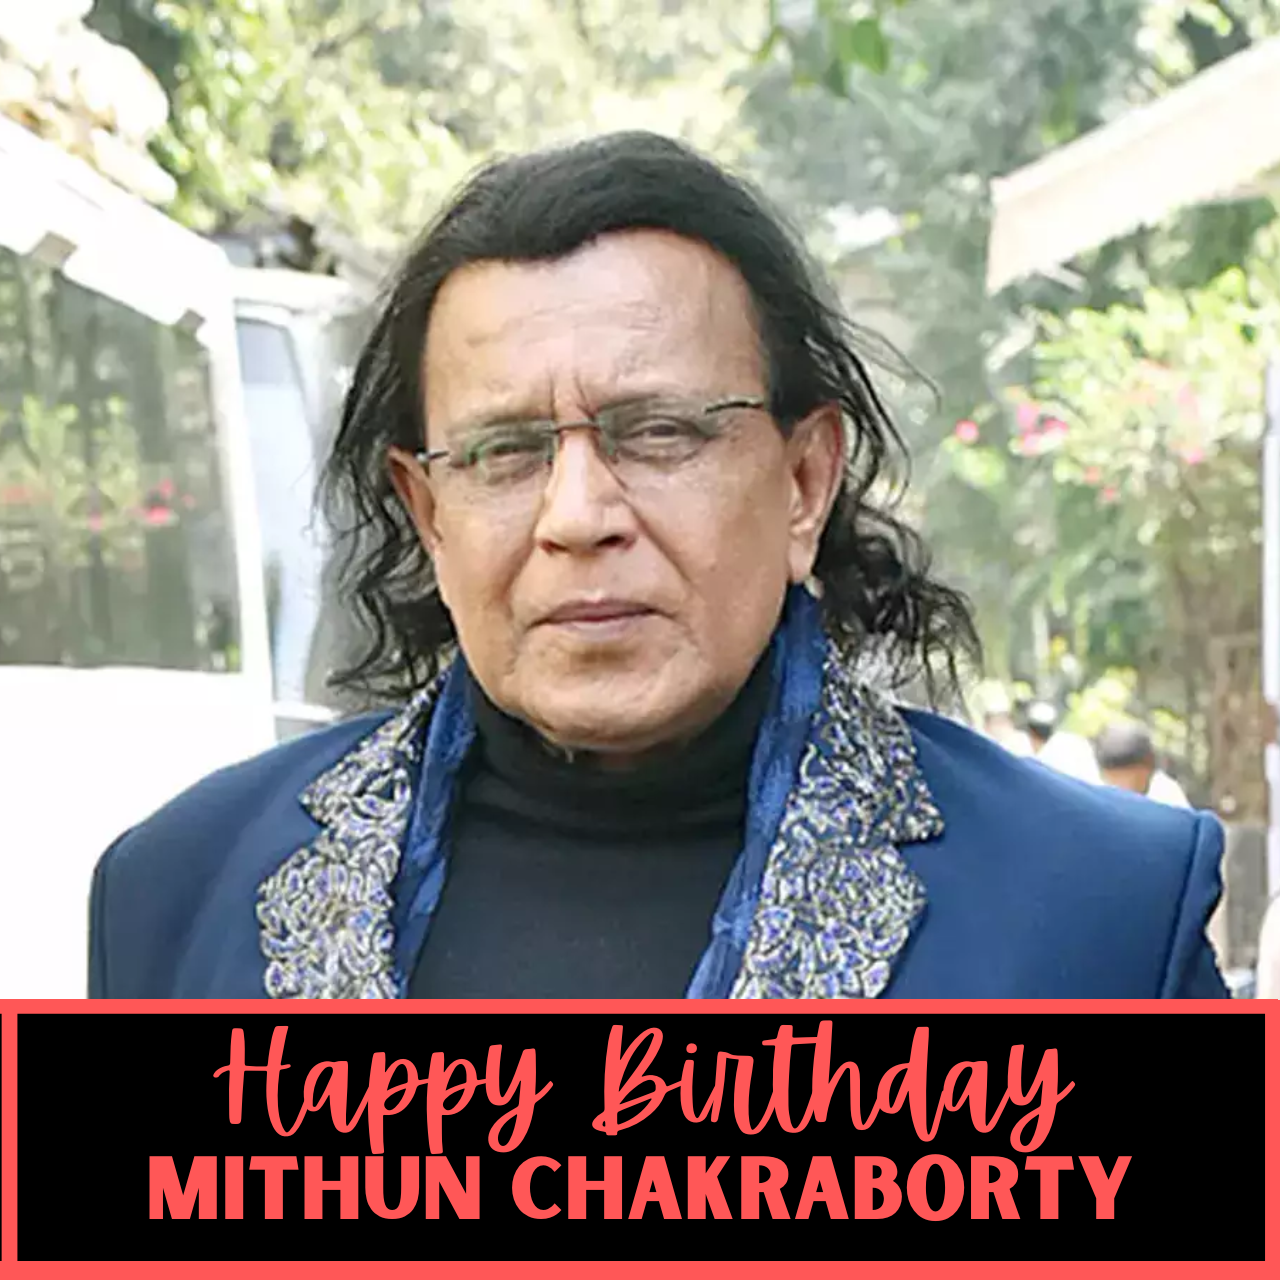 Happy Birthday Mithun Chakraborty: Top Wishes, Quotes, Images, Messages, Greetings to greet Bollywood's Dada